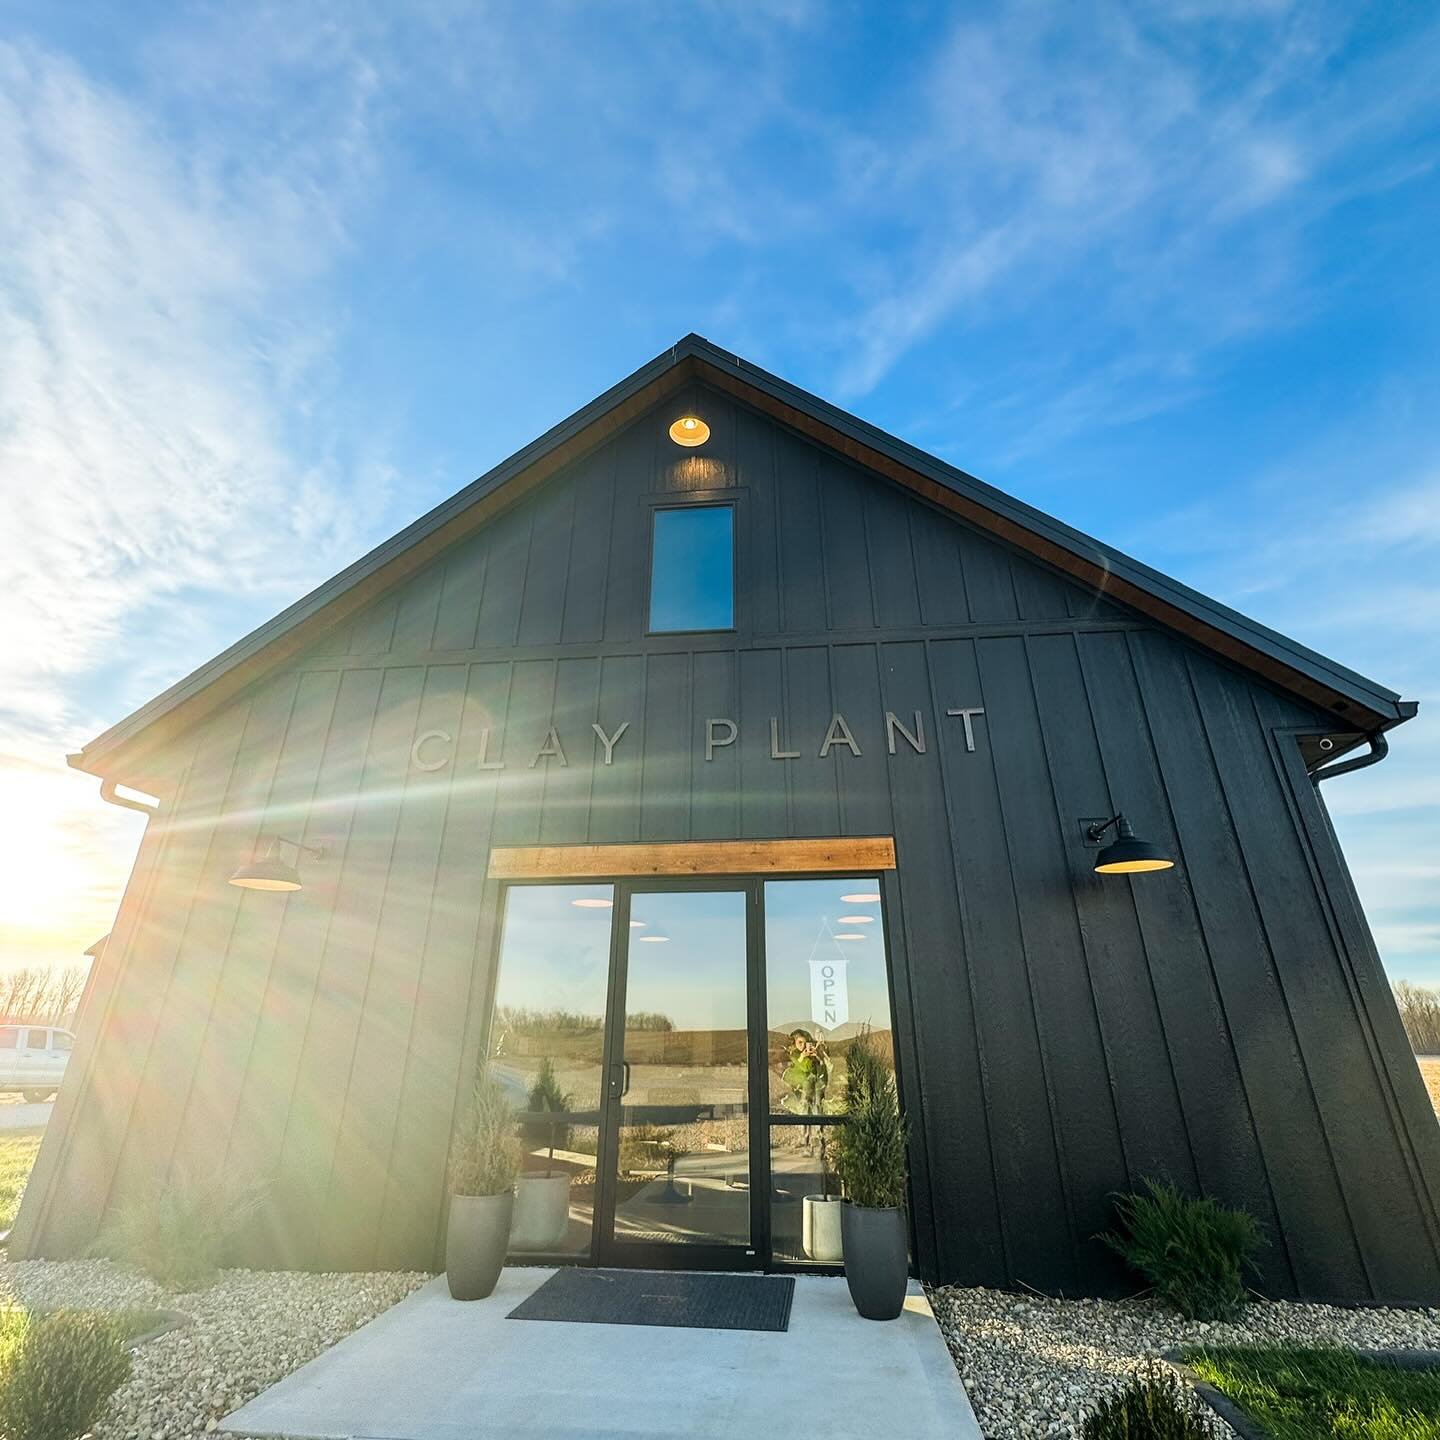 Have you visited @theclayplant Pottery Studio in Parke County, Indiana?! ✨

The Clay Plant offers wheel-throwing classes, paint-your-own pottery, and shopping. They are famous for their &ldquo;drippy&rdquo; mugs and &ldquo;glaze gloop&rdquo; rings. 
